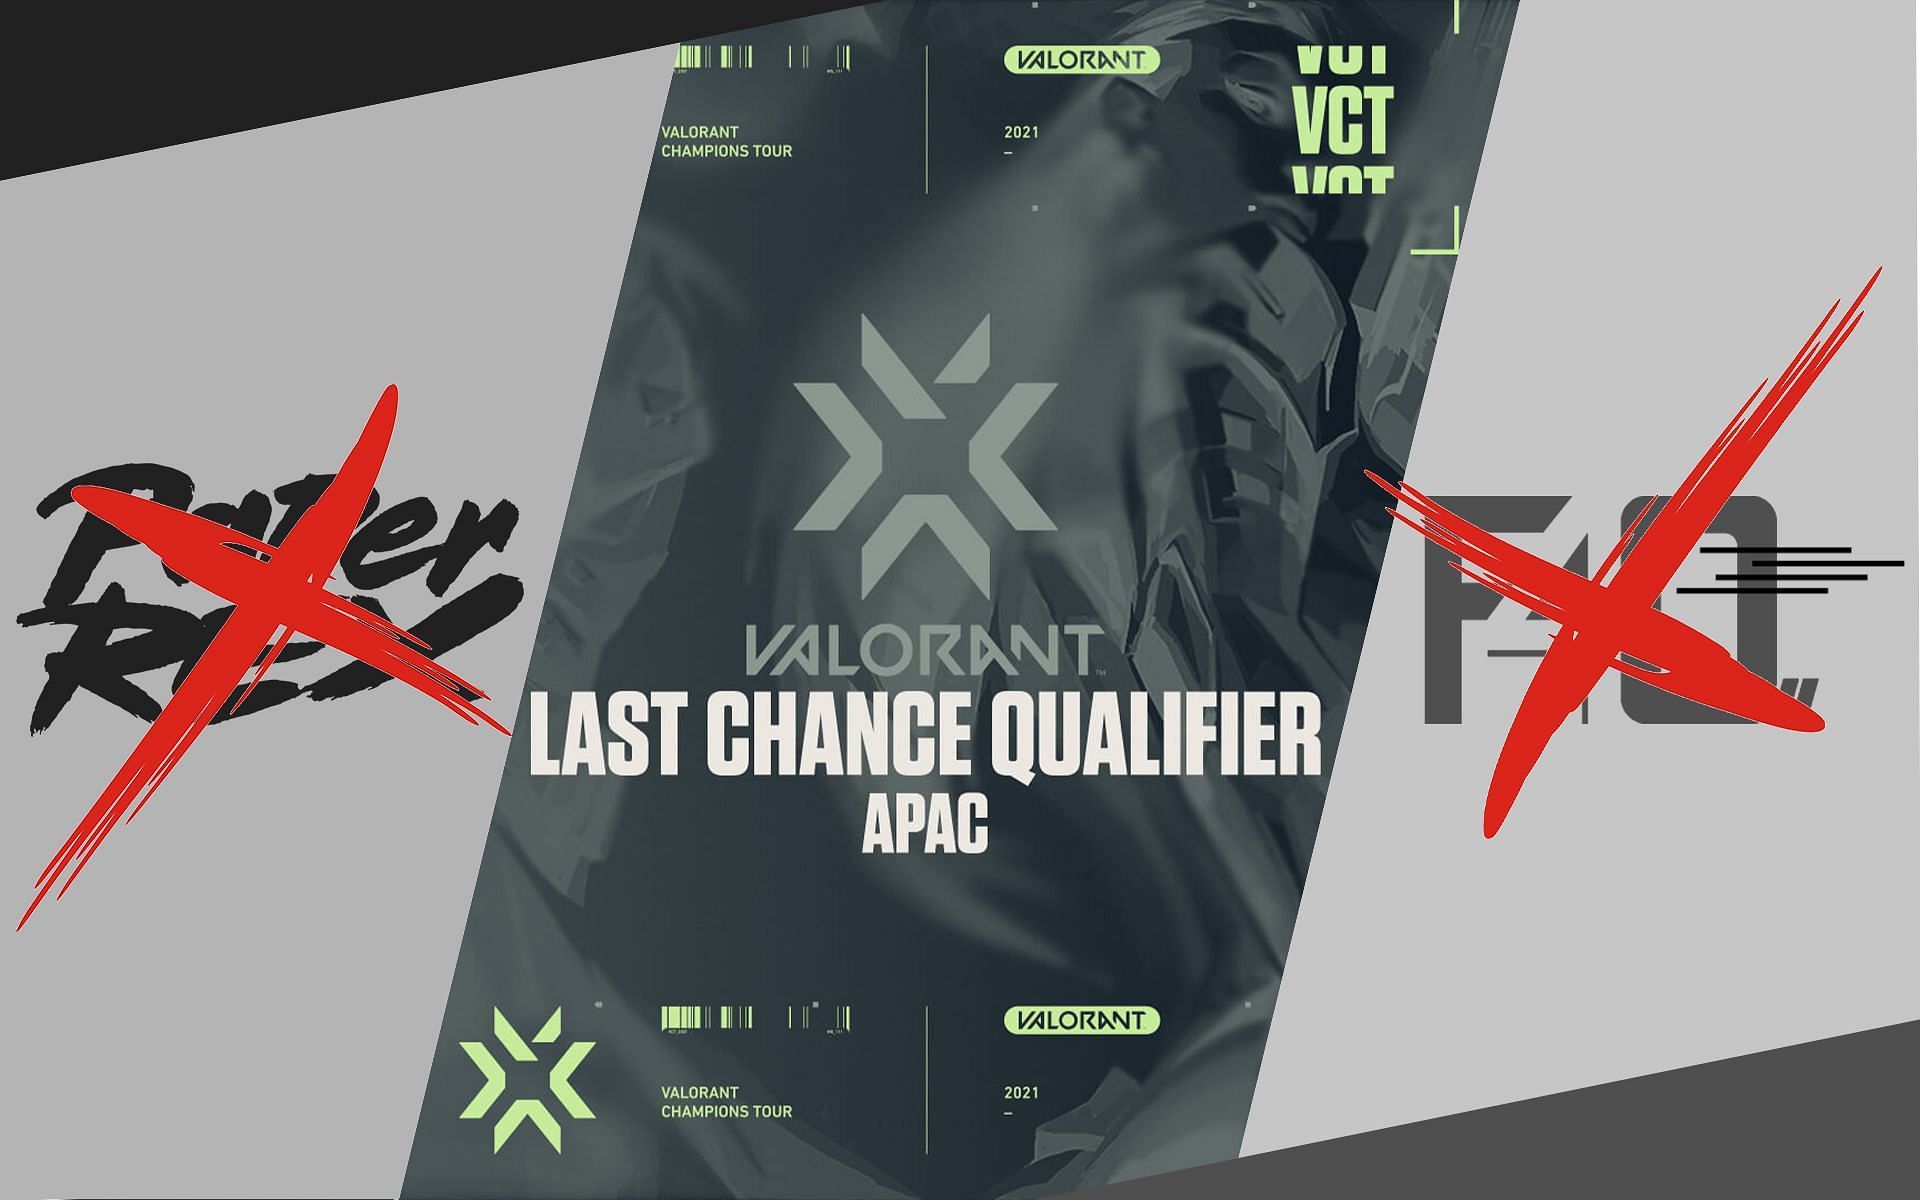 F4Q and Paper Rex got eliminated in the Valorant Champions Tour APAC LCQ (Image by Sportskeeda)